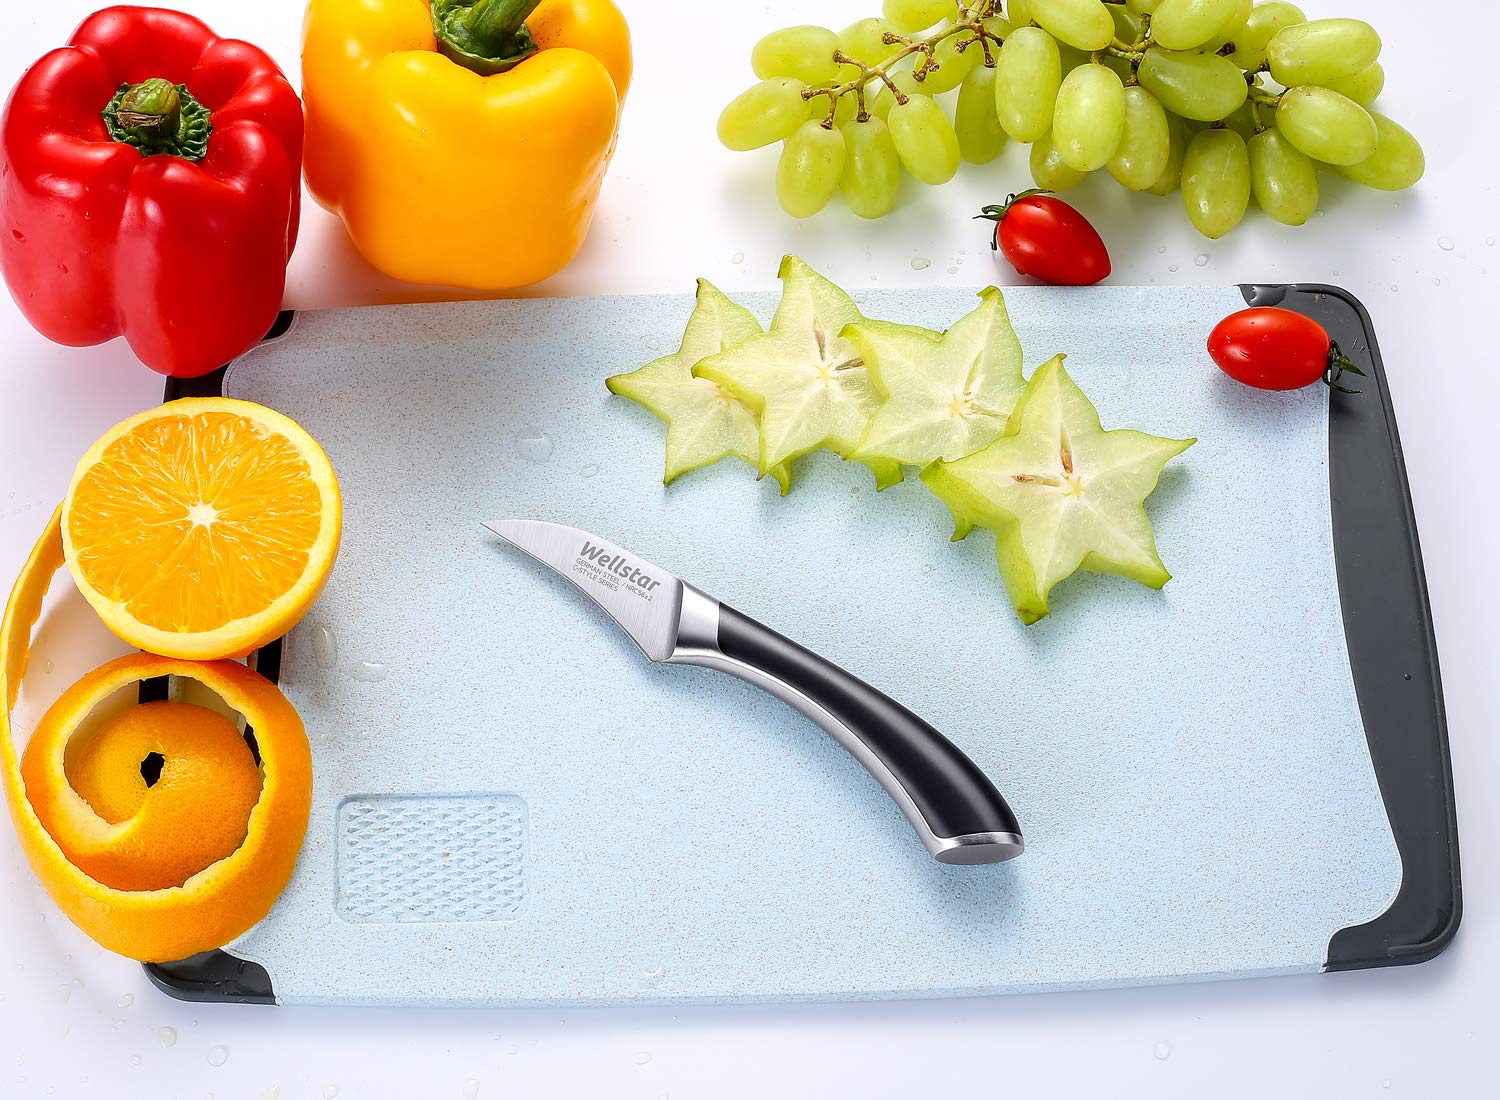 Birds Beak Paring Knife, WELLSTAR 2.75 Inch Potato Tourne Peeling Knife, Super Sharp German Stainless Steel Forged Blade and Full Tang Handle for Fruit and Vegetable Garnishing Cutting, C-Style Series